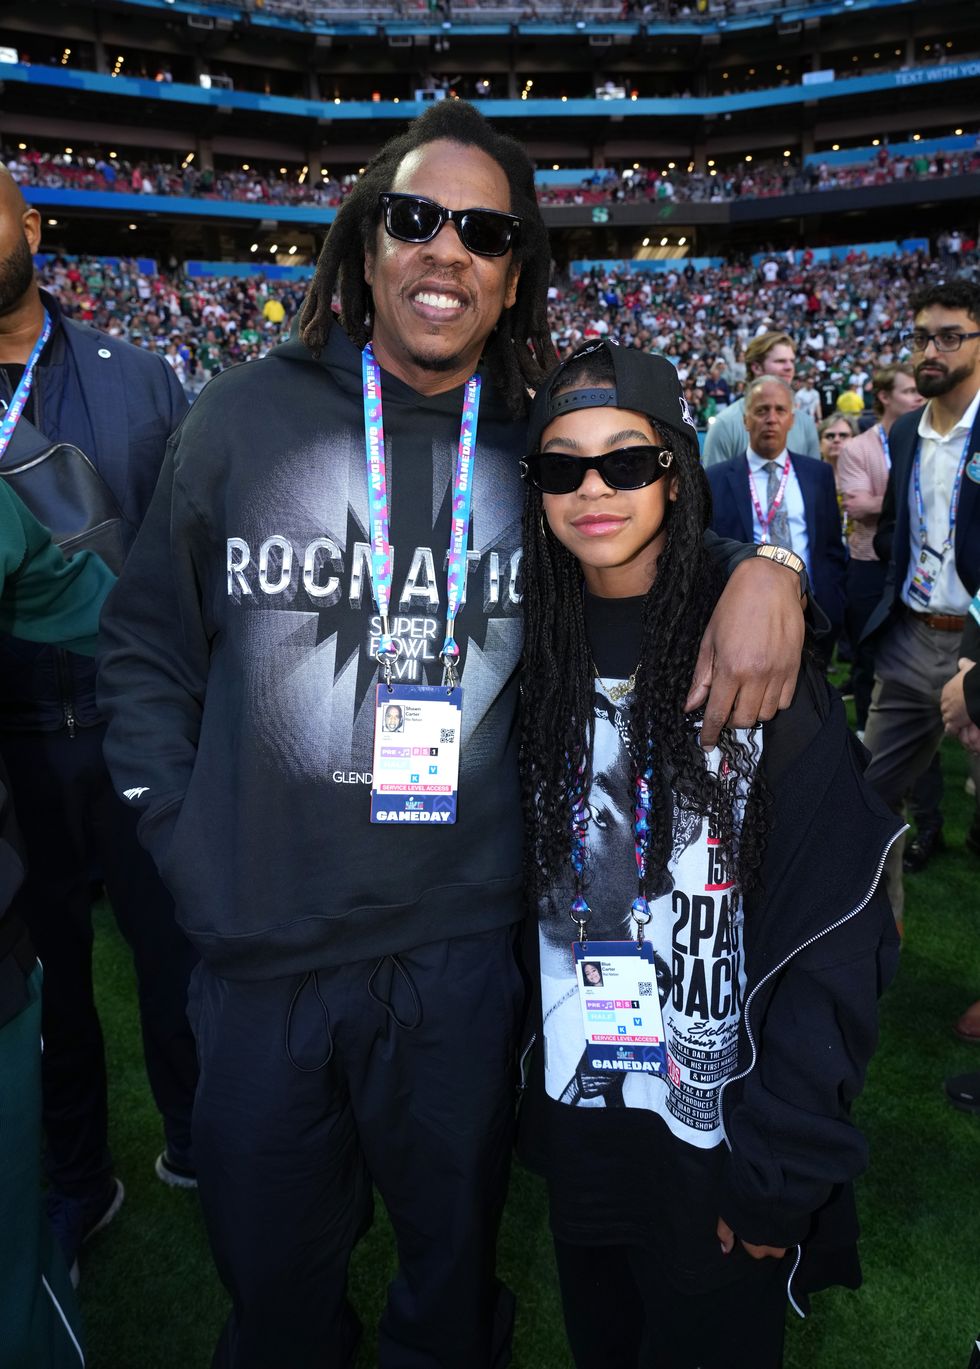 glendale, arizona february 12 l r jay z and blue ivy carter attend super bowl lvii at state farm stadium on february 12, 2023 in glendale, arizona photo by kevin mazurgetty images for roc nation